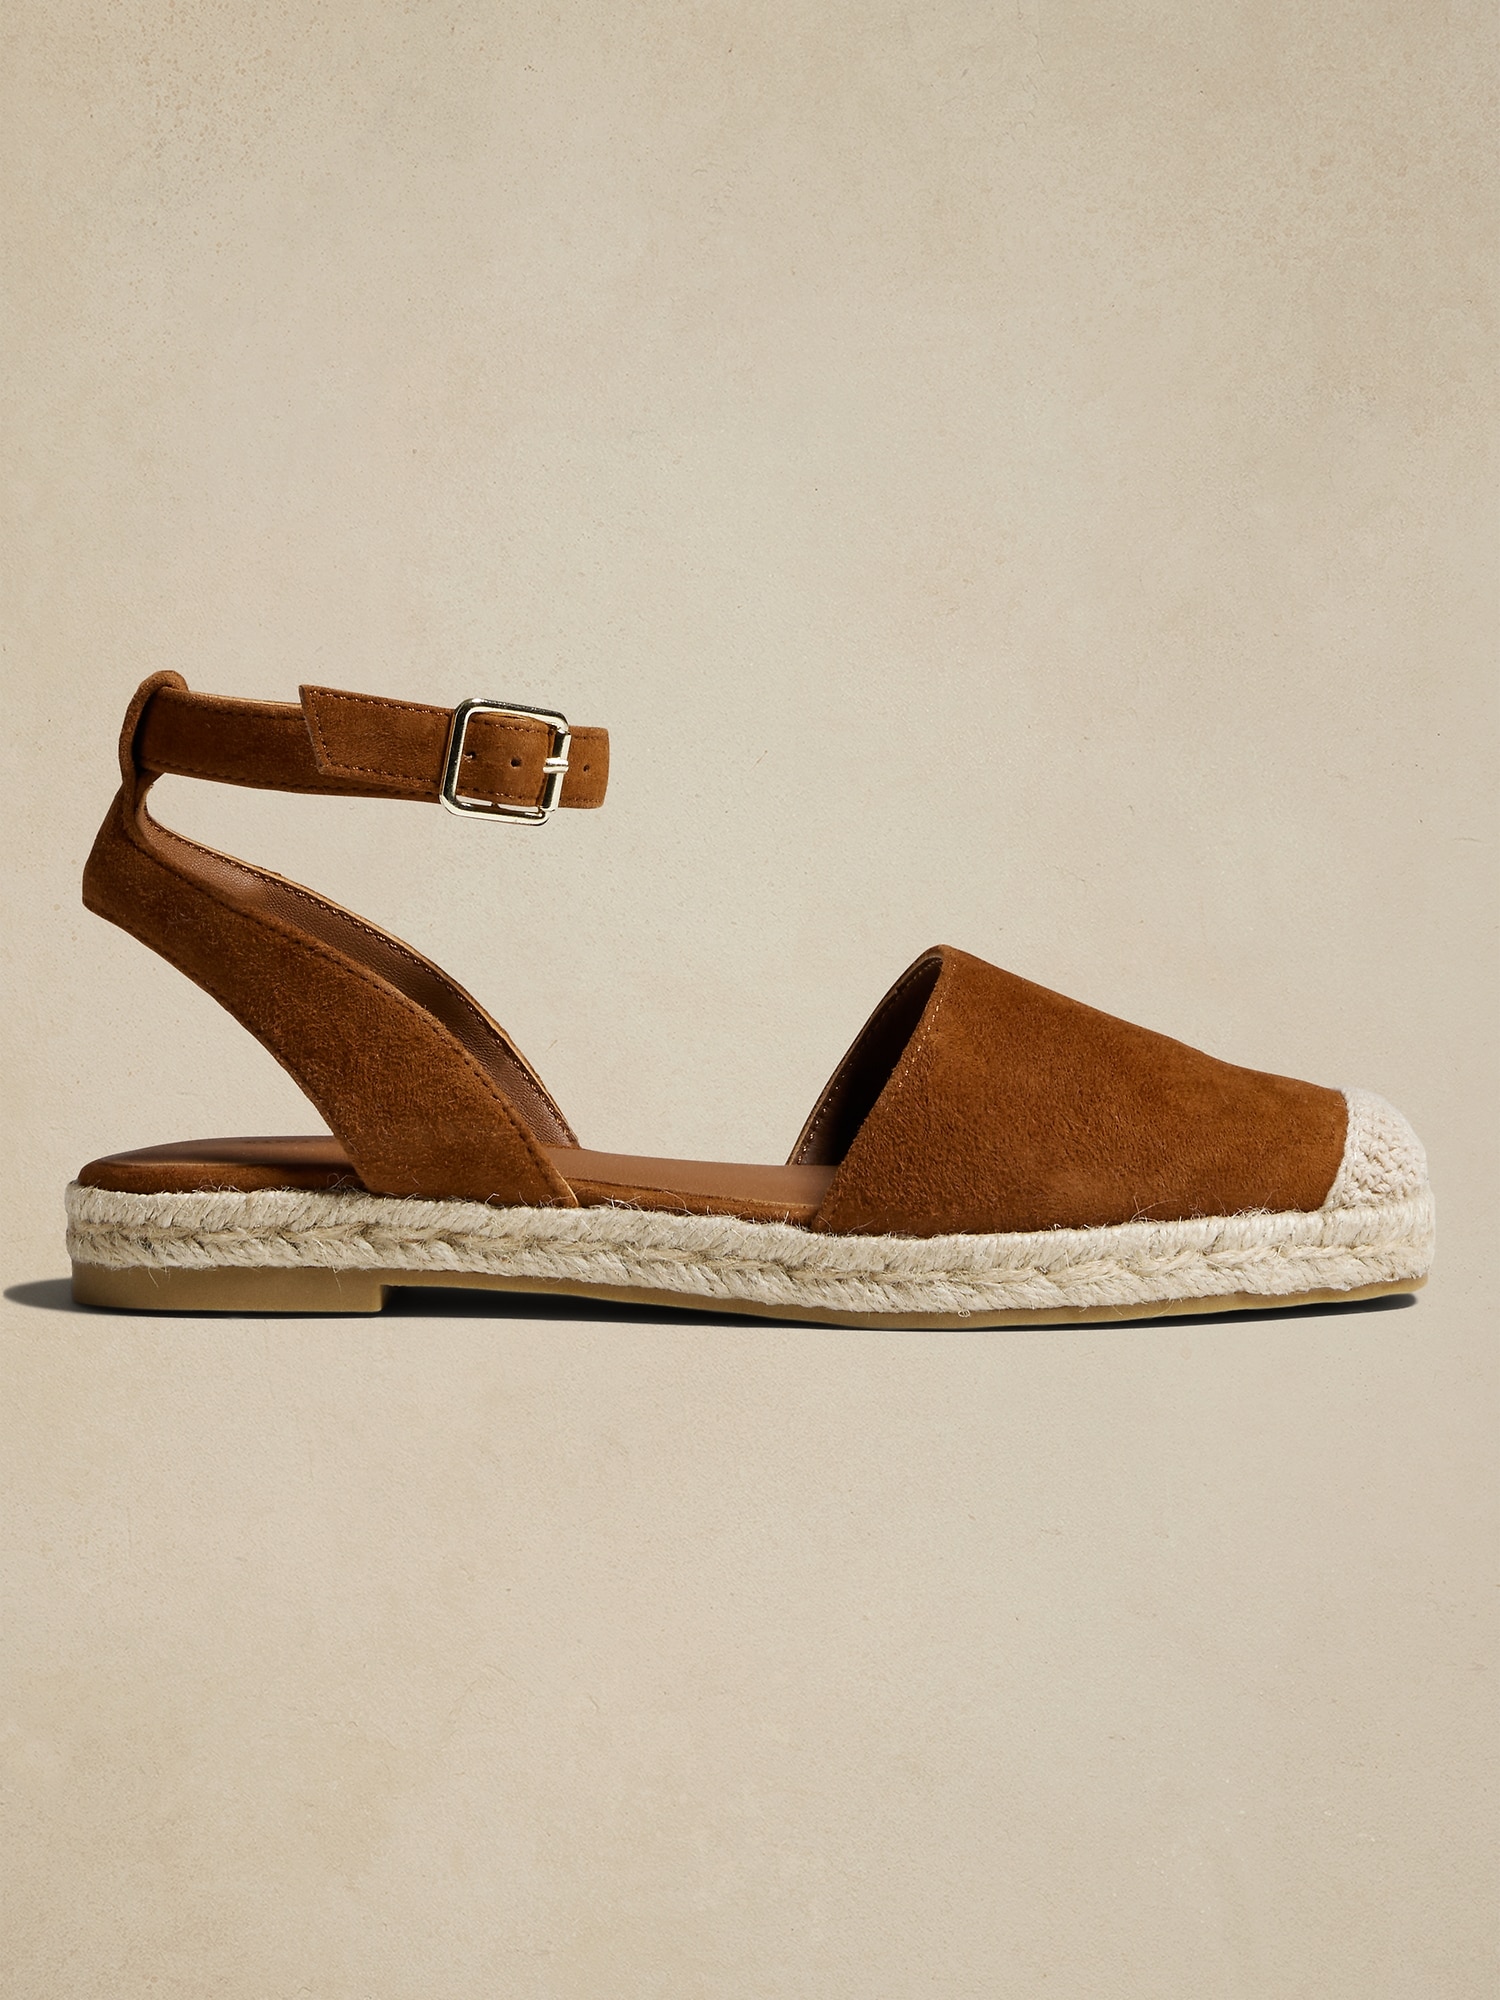 Women's Closed Toe Flat Sandals + FREE SHIPPING | Shoes | Zappos.com